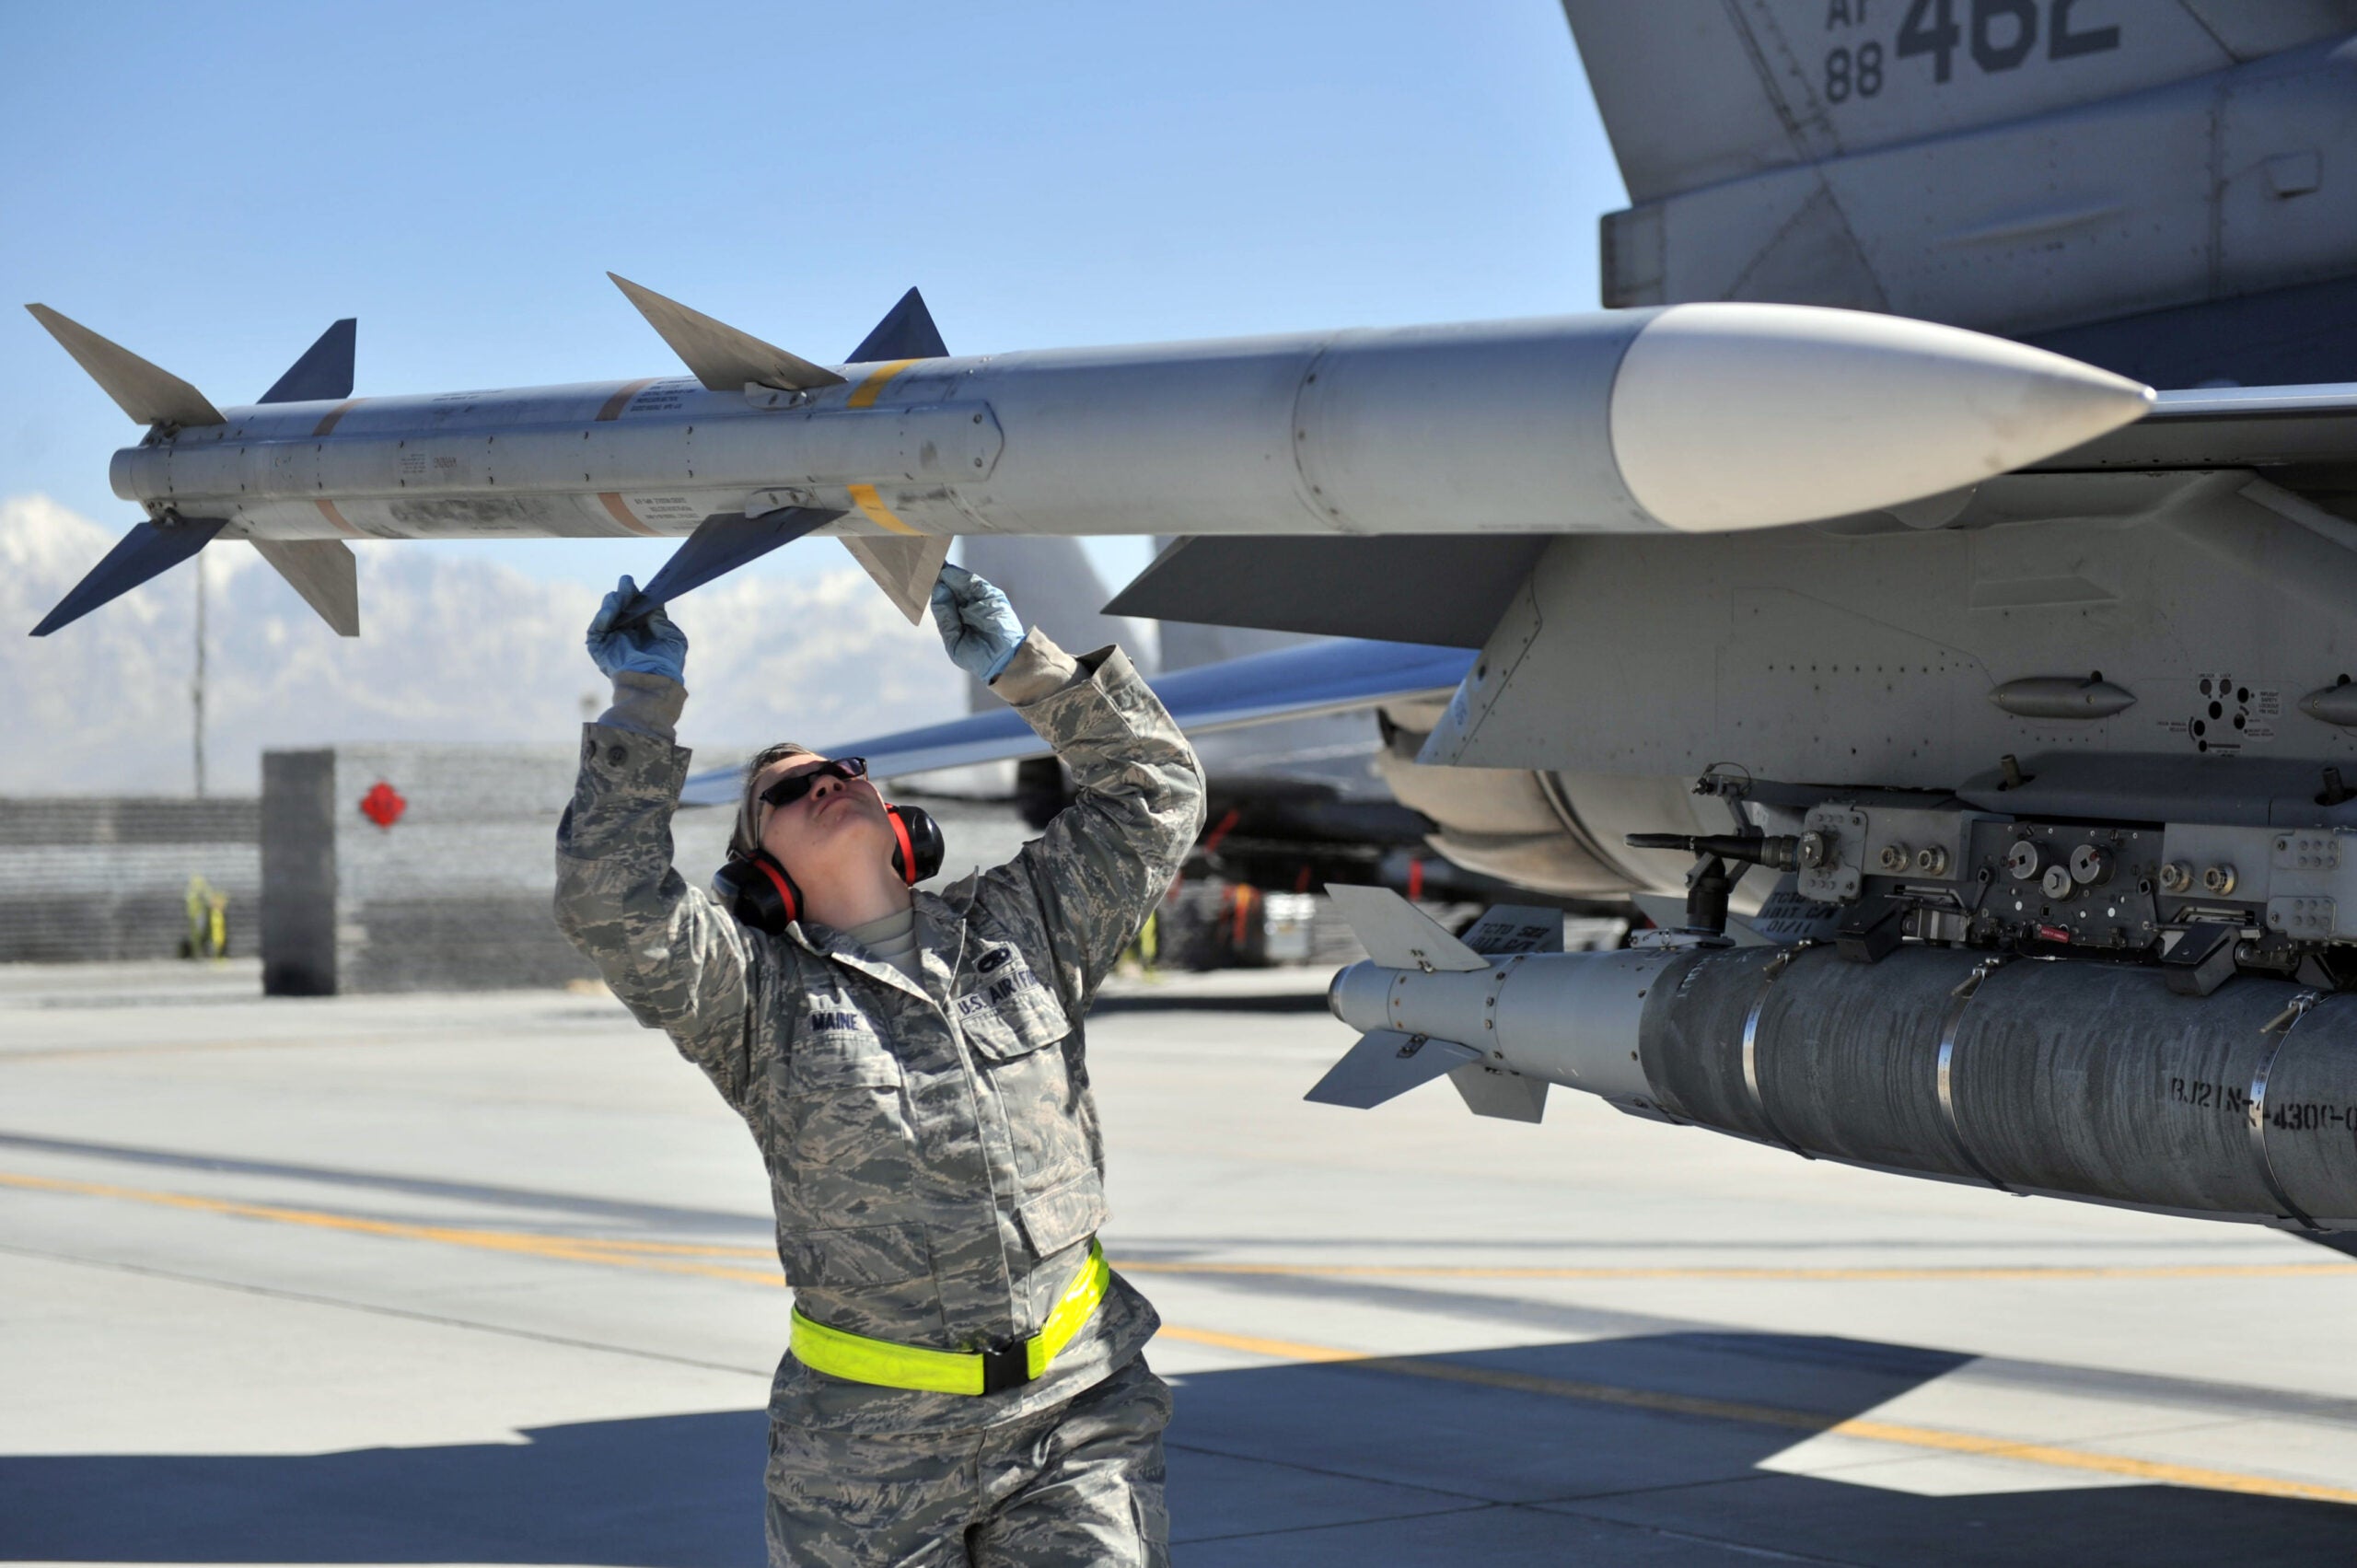 Senior Airman Hilarie Maine, 455th Expeditionary Aircraft Maintenance Squadron, ensures a missile is secured on the wing tip of on an F-16 Fighting Falcon before taking off during an end of runway check at Bagram Airfield, Afghanistan, March 9, 2011. The EOR check is a final inspection to verify there is nothing wrong with the jet before it departs. Airman Maine is deployed from Hill Air Force Base, Utah. (U.S. Air Force photo by Senior Airman Sheila deVera)